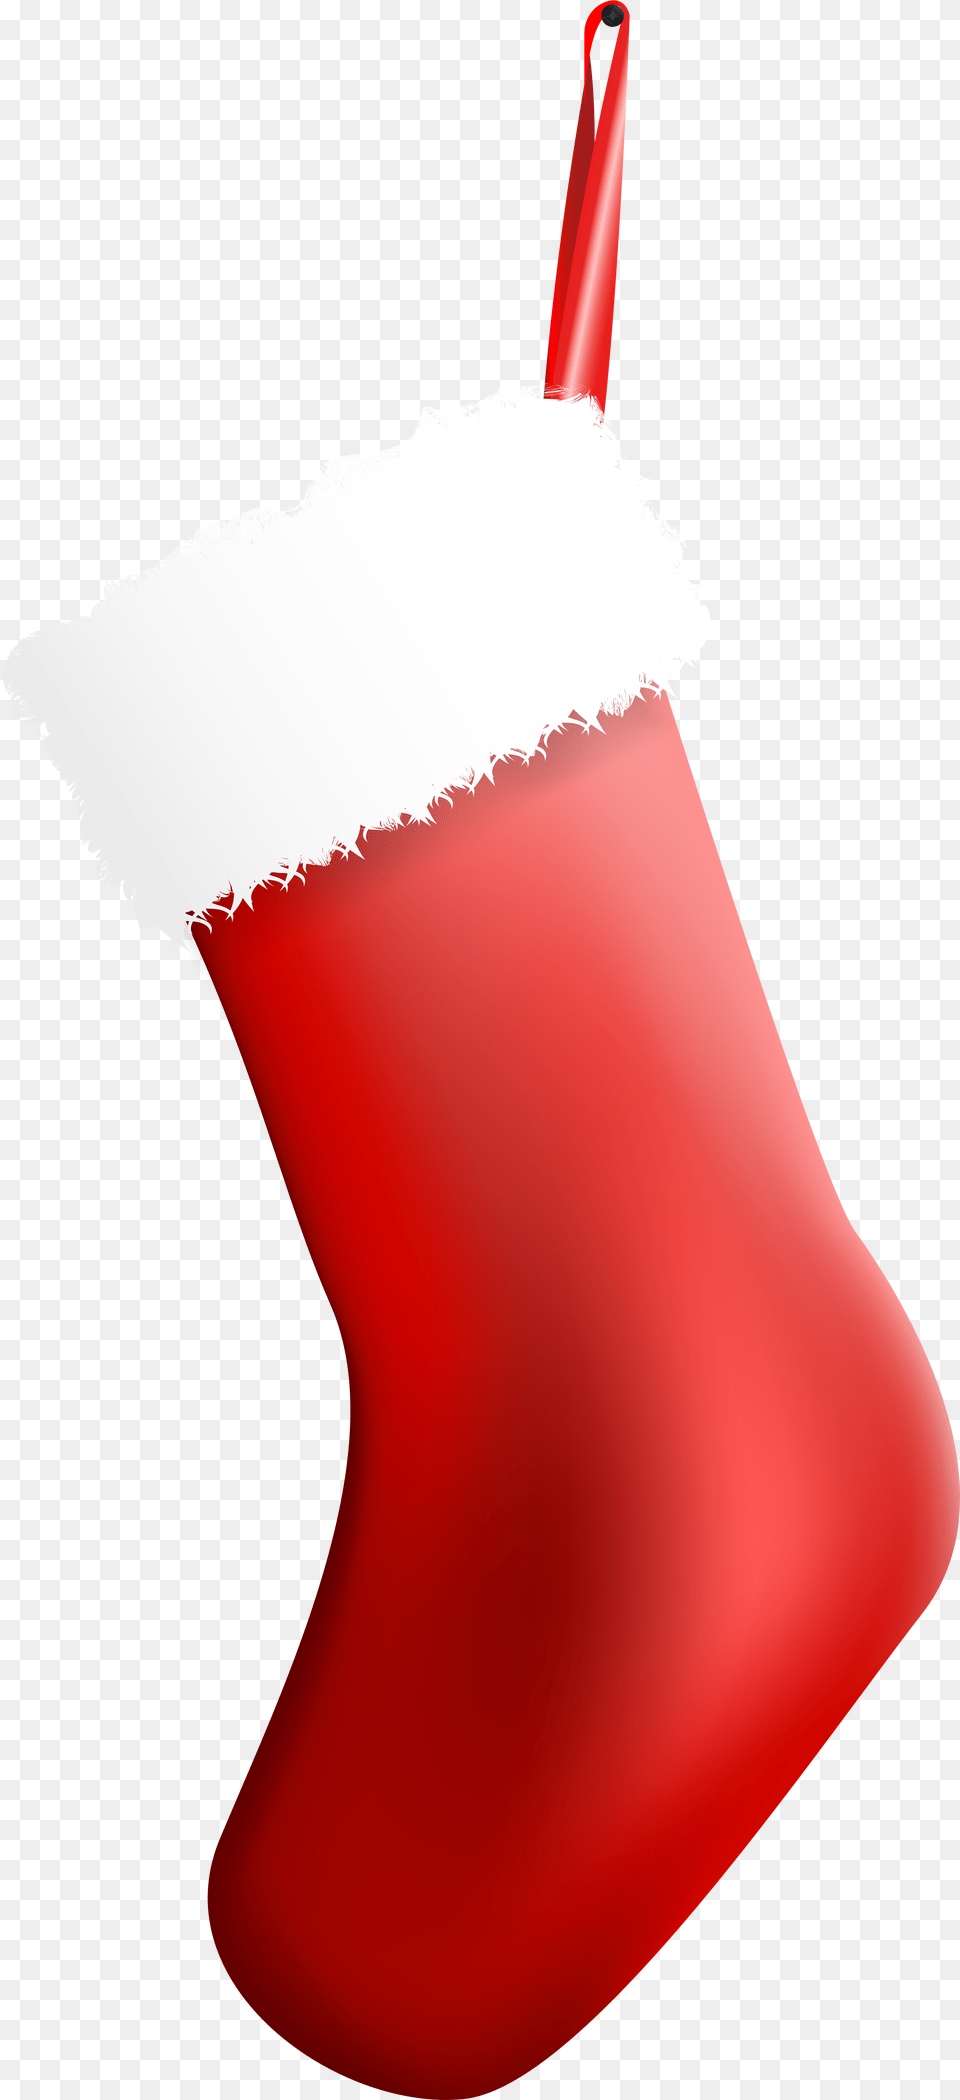 Christmas Stocking Clip Art, Clothing, Hosiery, Christmas Decorations, Christmas Stocking Free Transparent Png